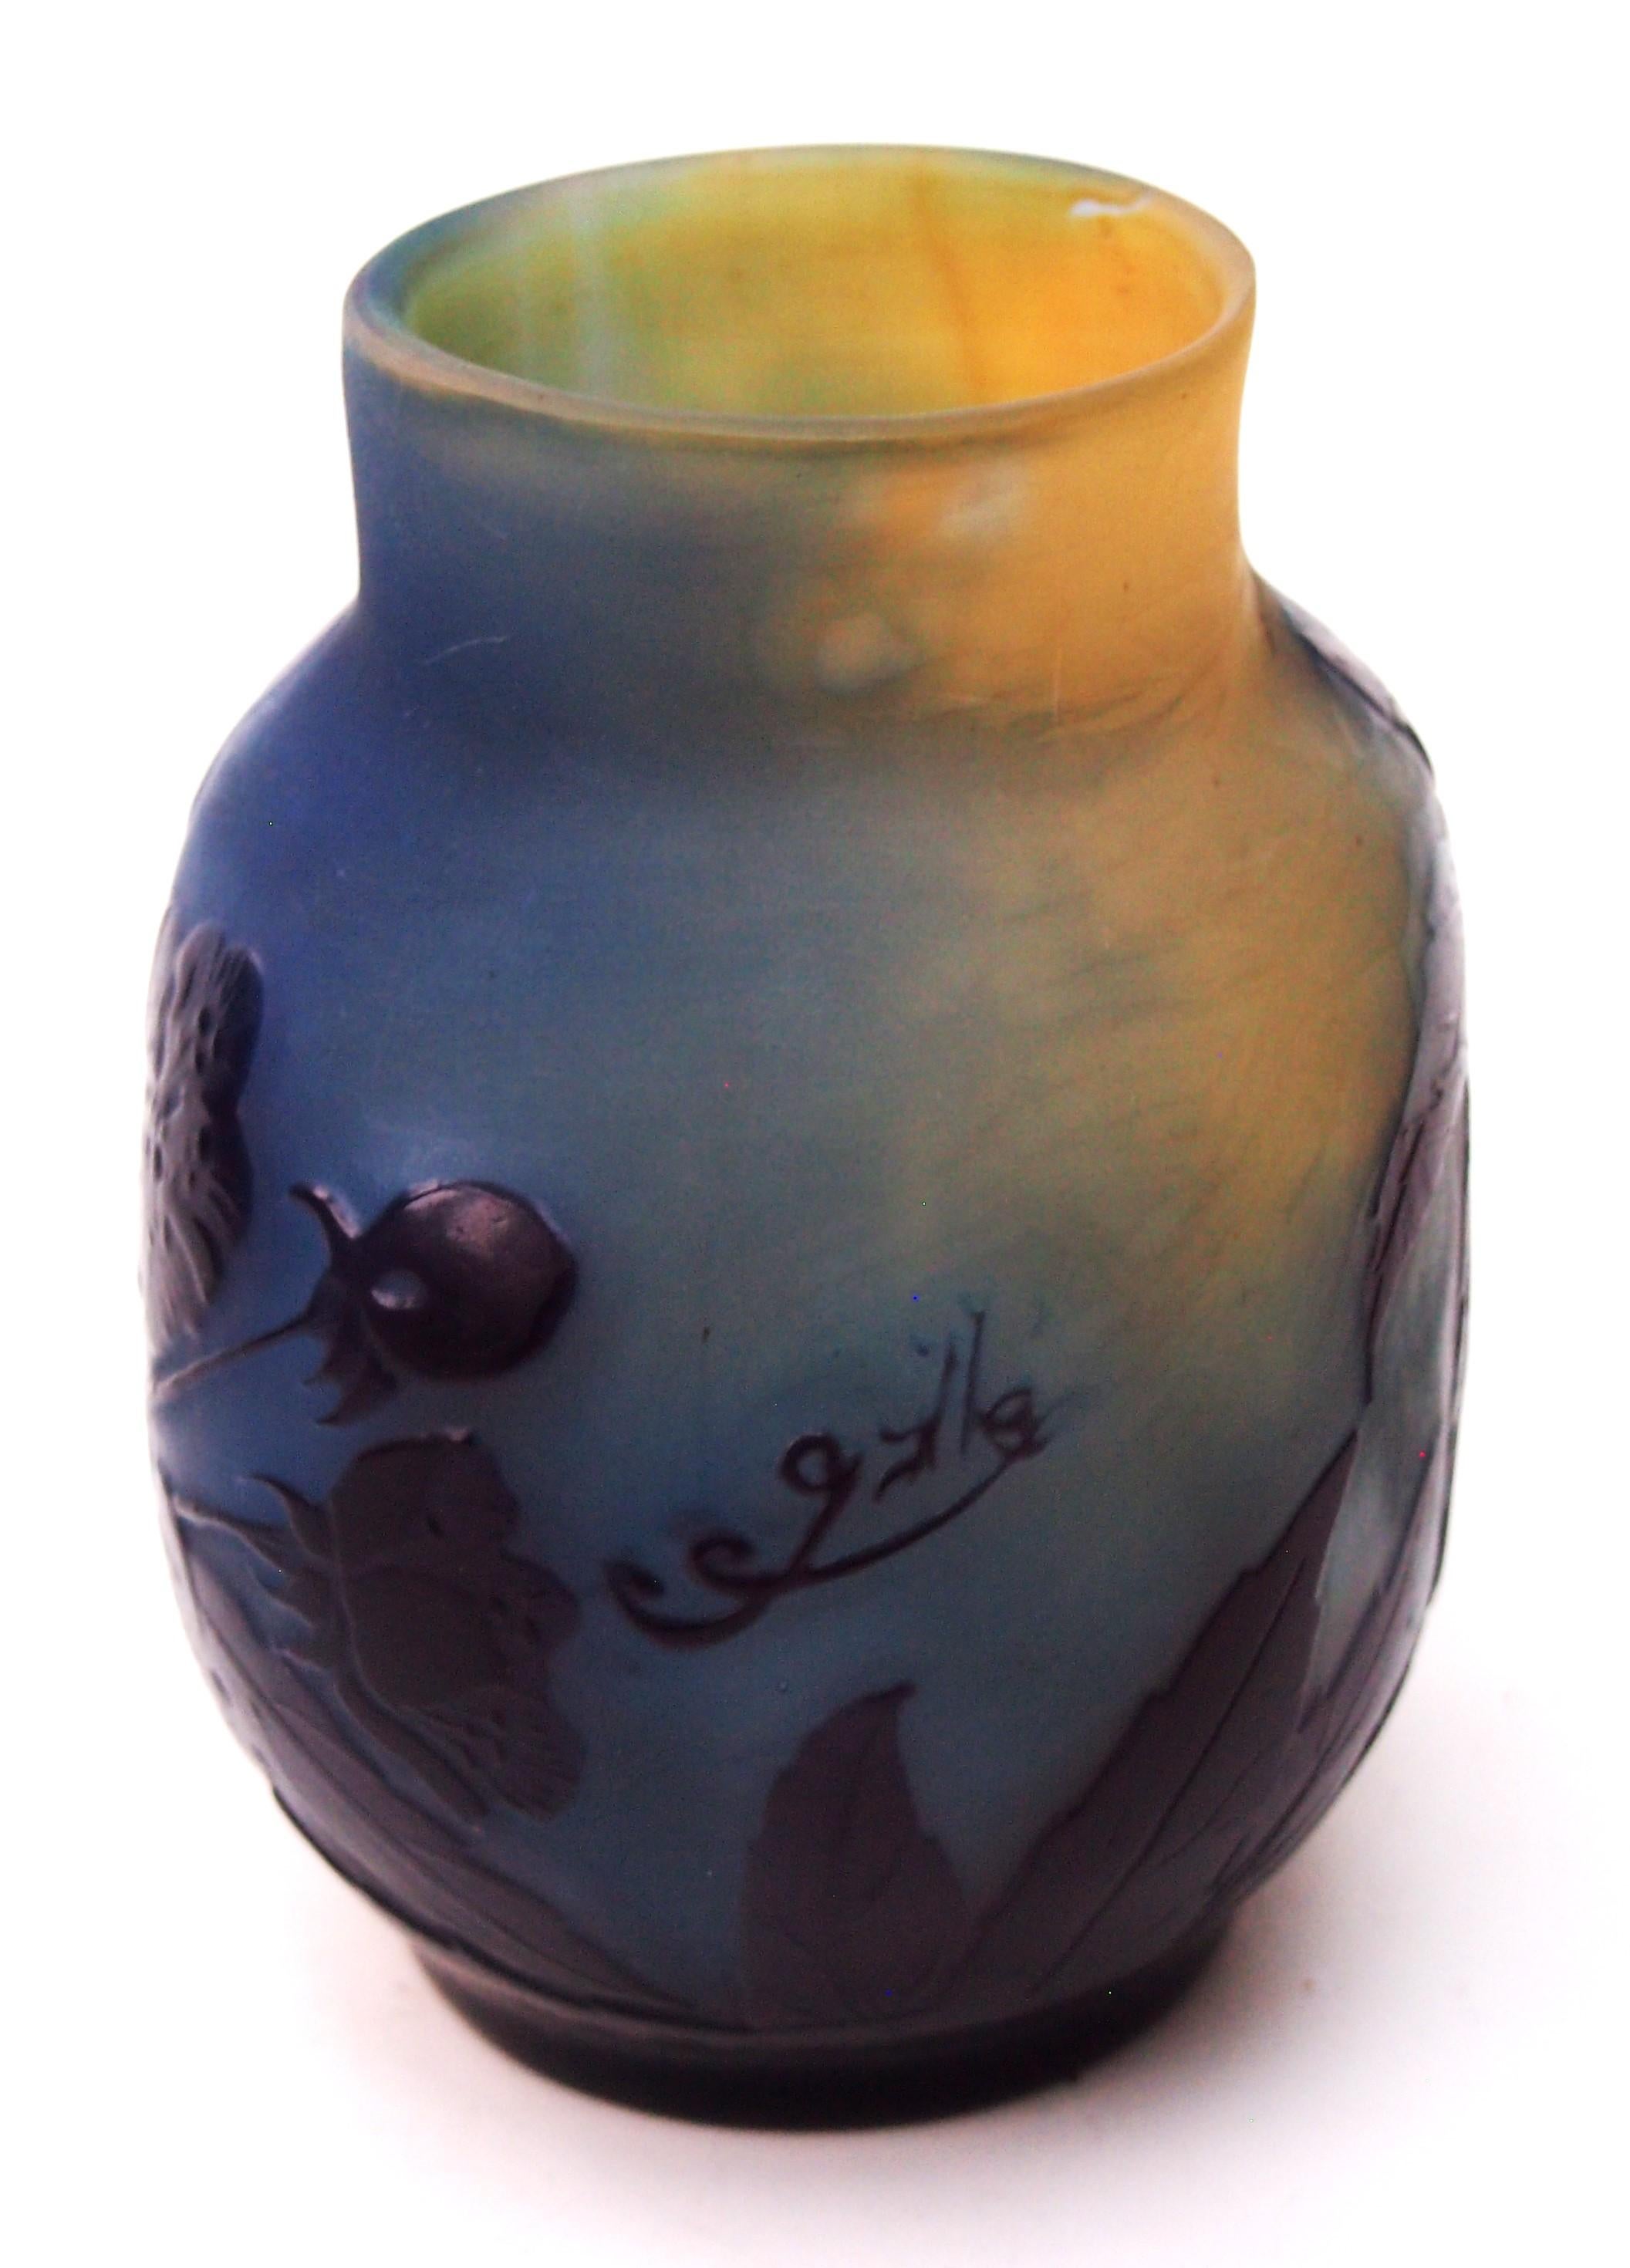 Rare Art Nouveau Emile Galle Cameo botanical vase, depicting flowers, in purple over blue and yellow. The flowers are set mostly against a dark blue background giving the illusion of them being lit by moonlight - This is a known but rare effect done